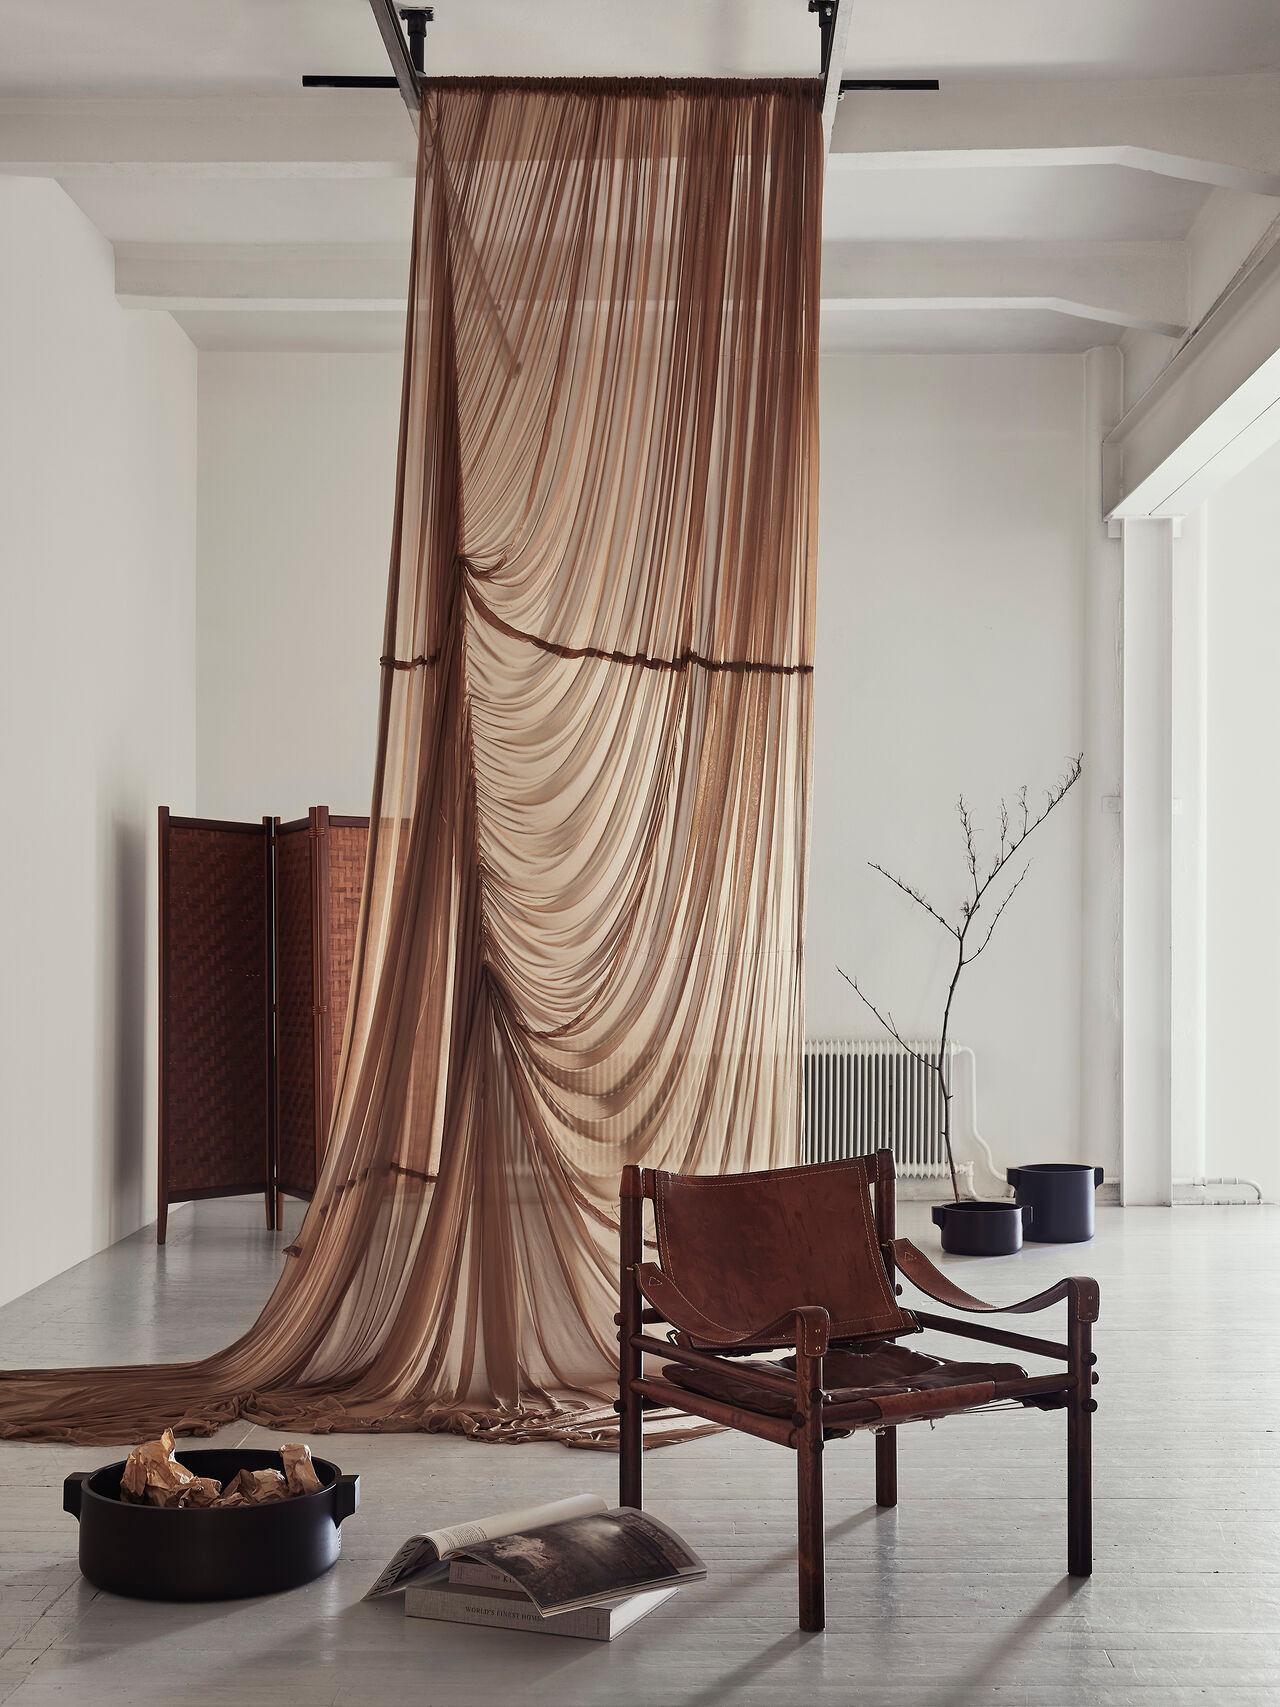 Alberts Tibro, a renowned furniture maker, is known for its attention to detail and dedication to producing quality pieces. This room divider is no exception, showcasing the brand's commitment to excellence in design and craftsmanship.

Braided with